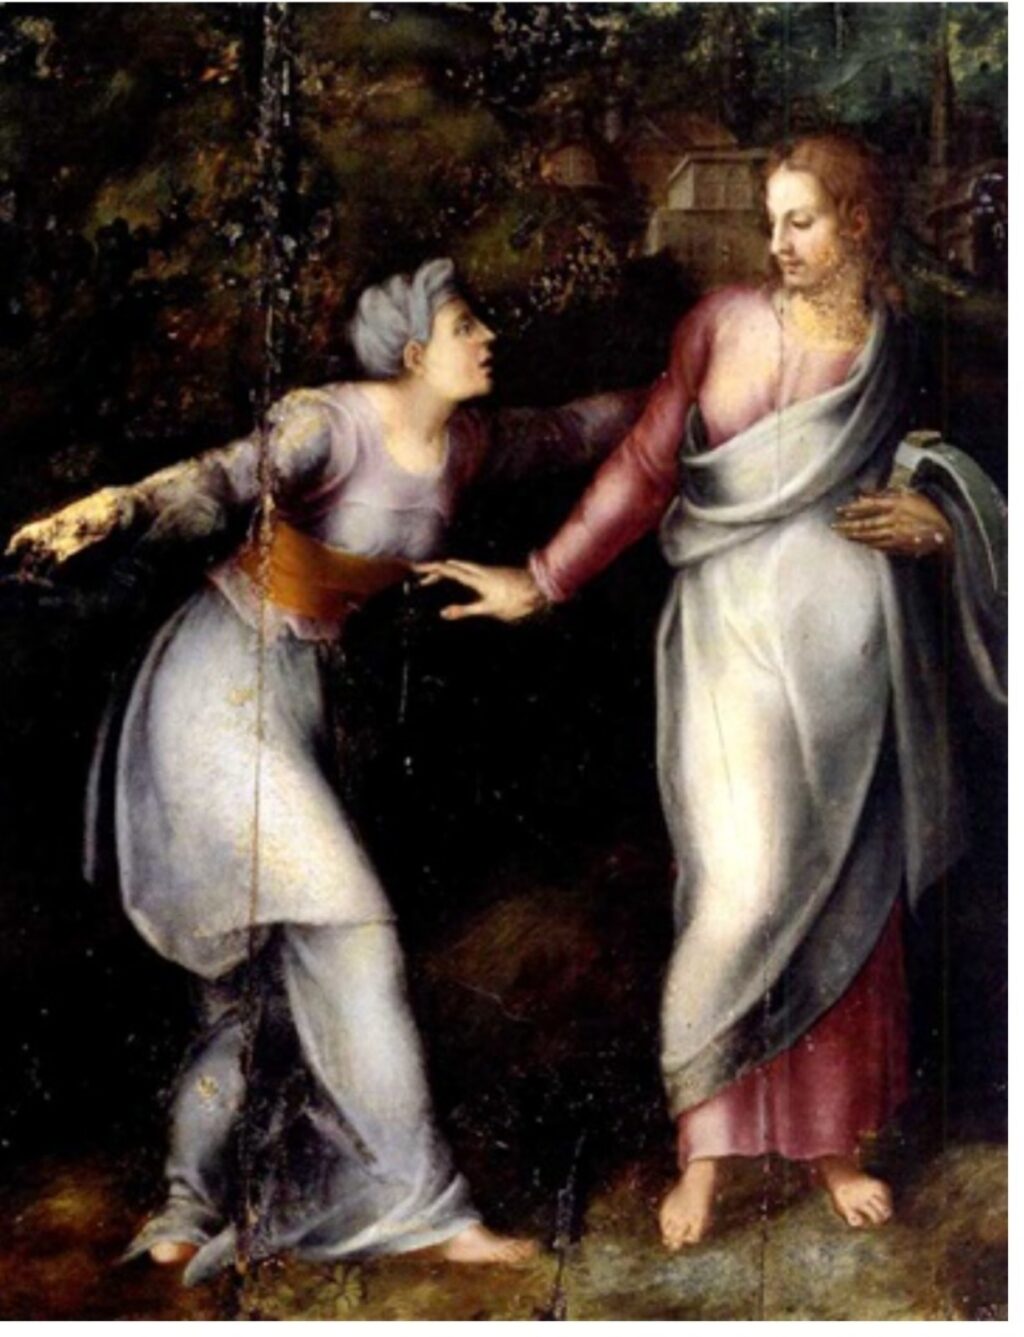 Mary Magdalene Easter and Noli Me Tangere. Noli Me Tangere painting (1531)  by Michelangelo 